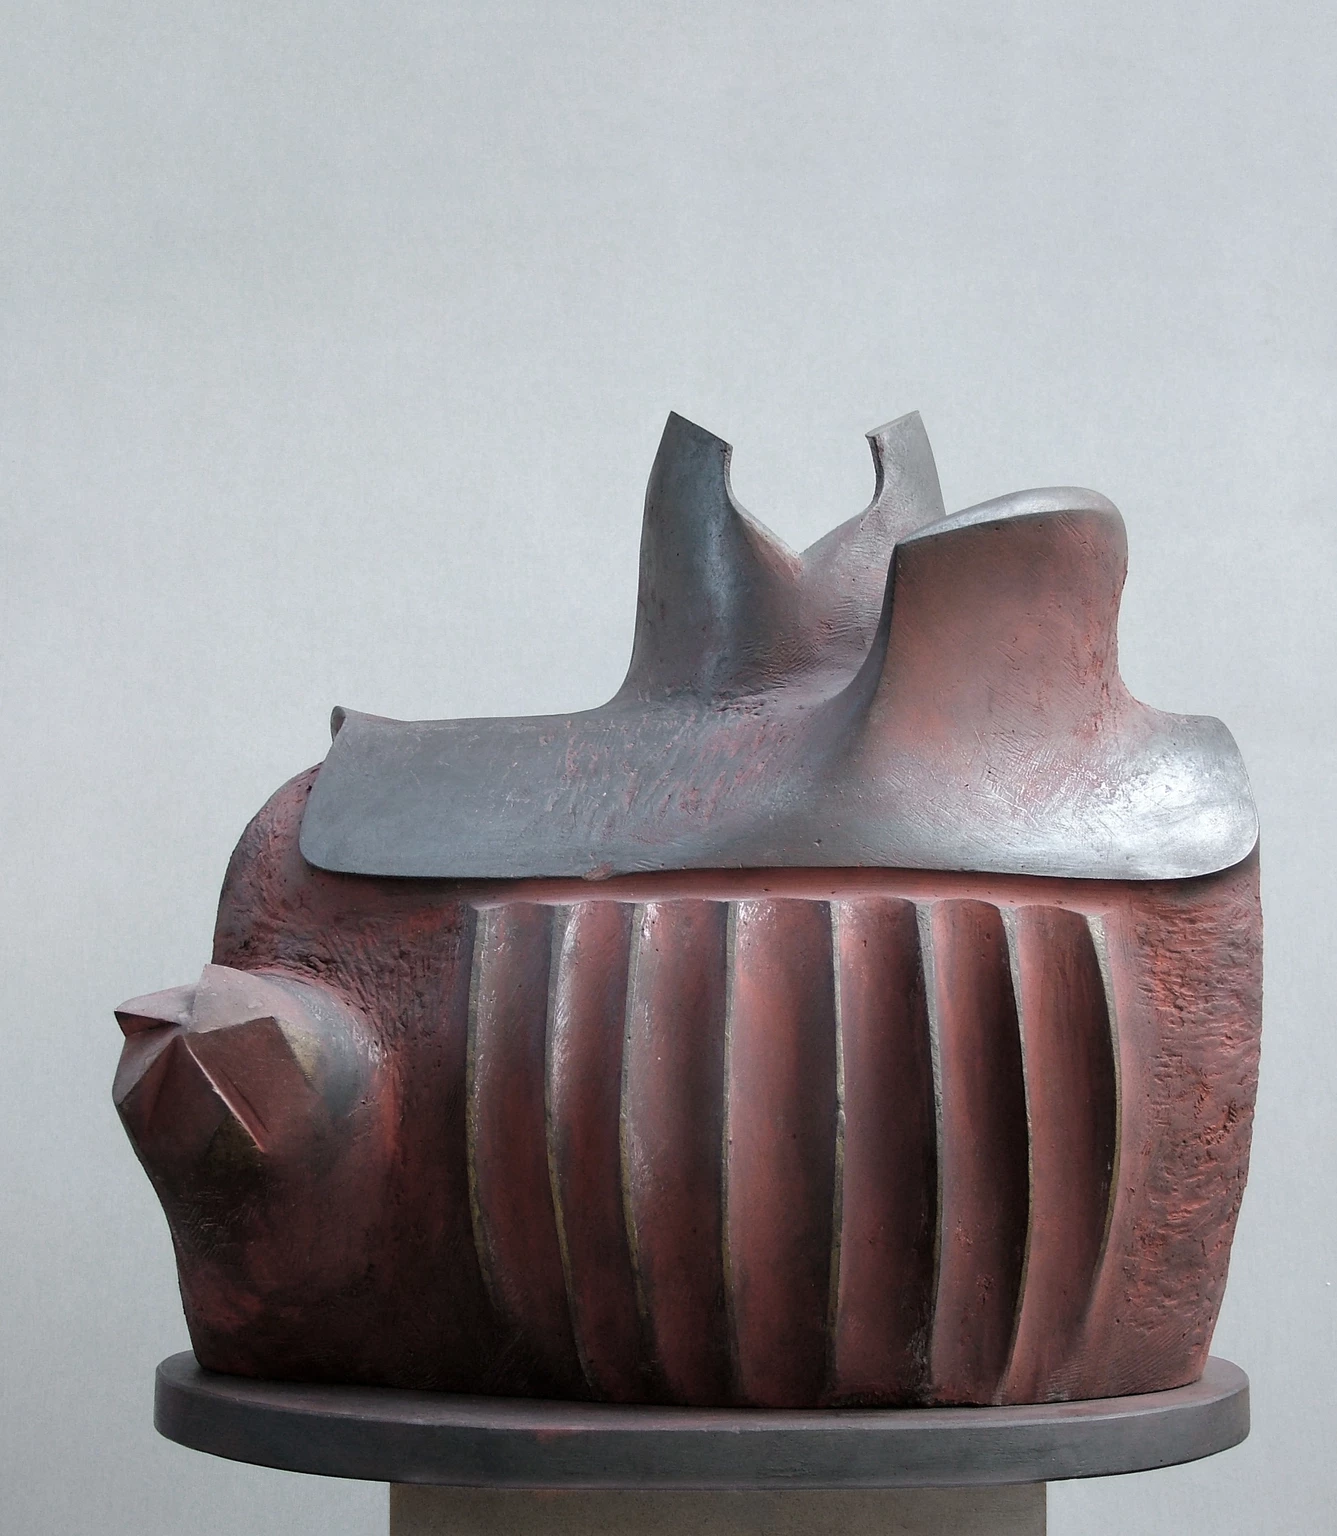 Warrior (large) II., 1988 - patinated plaster, 65 x 67 x 45 cm